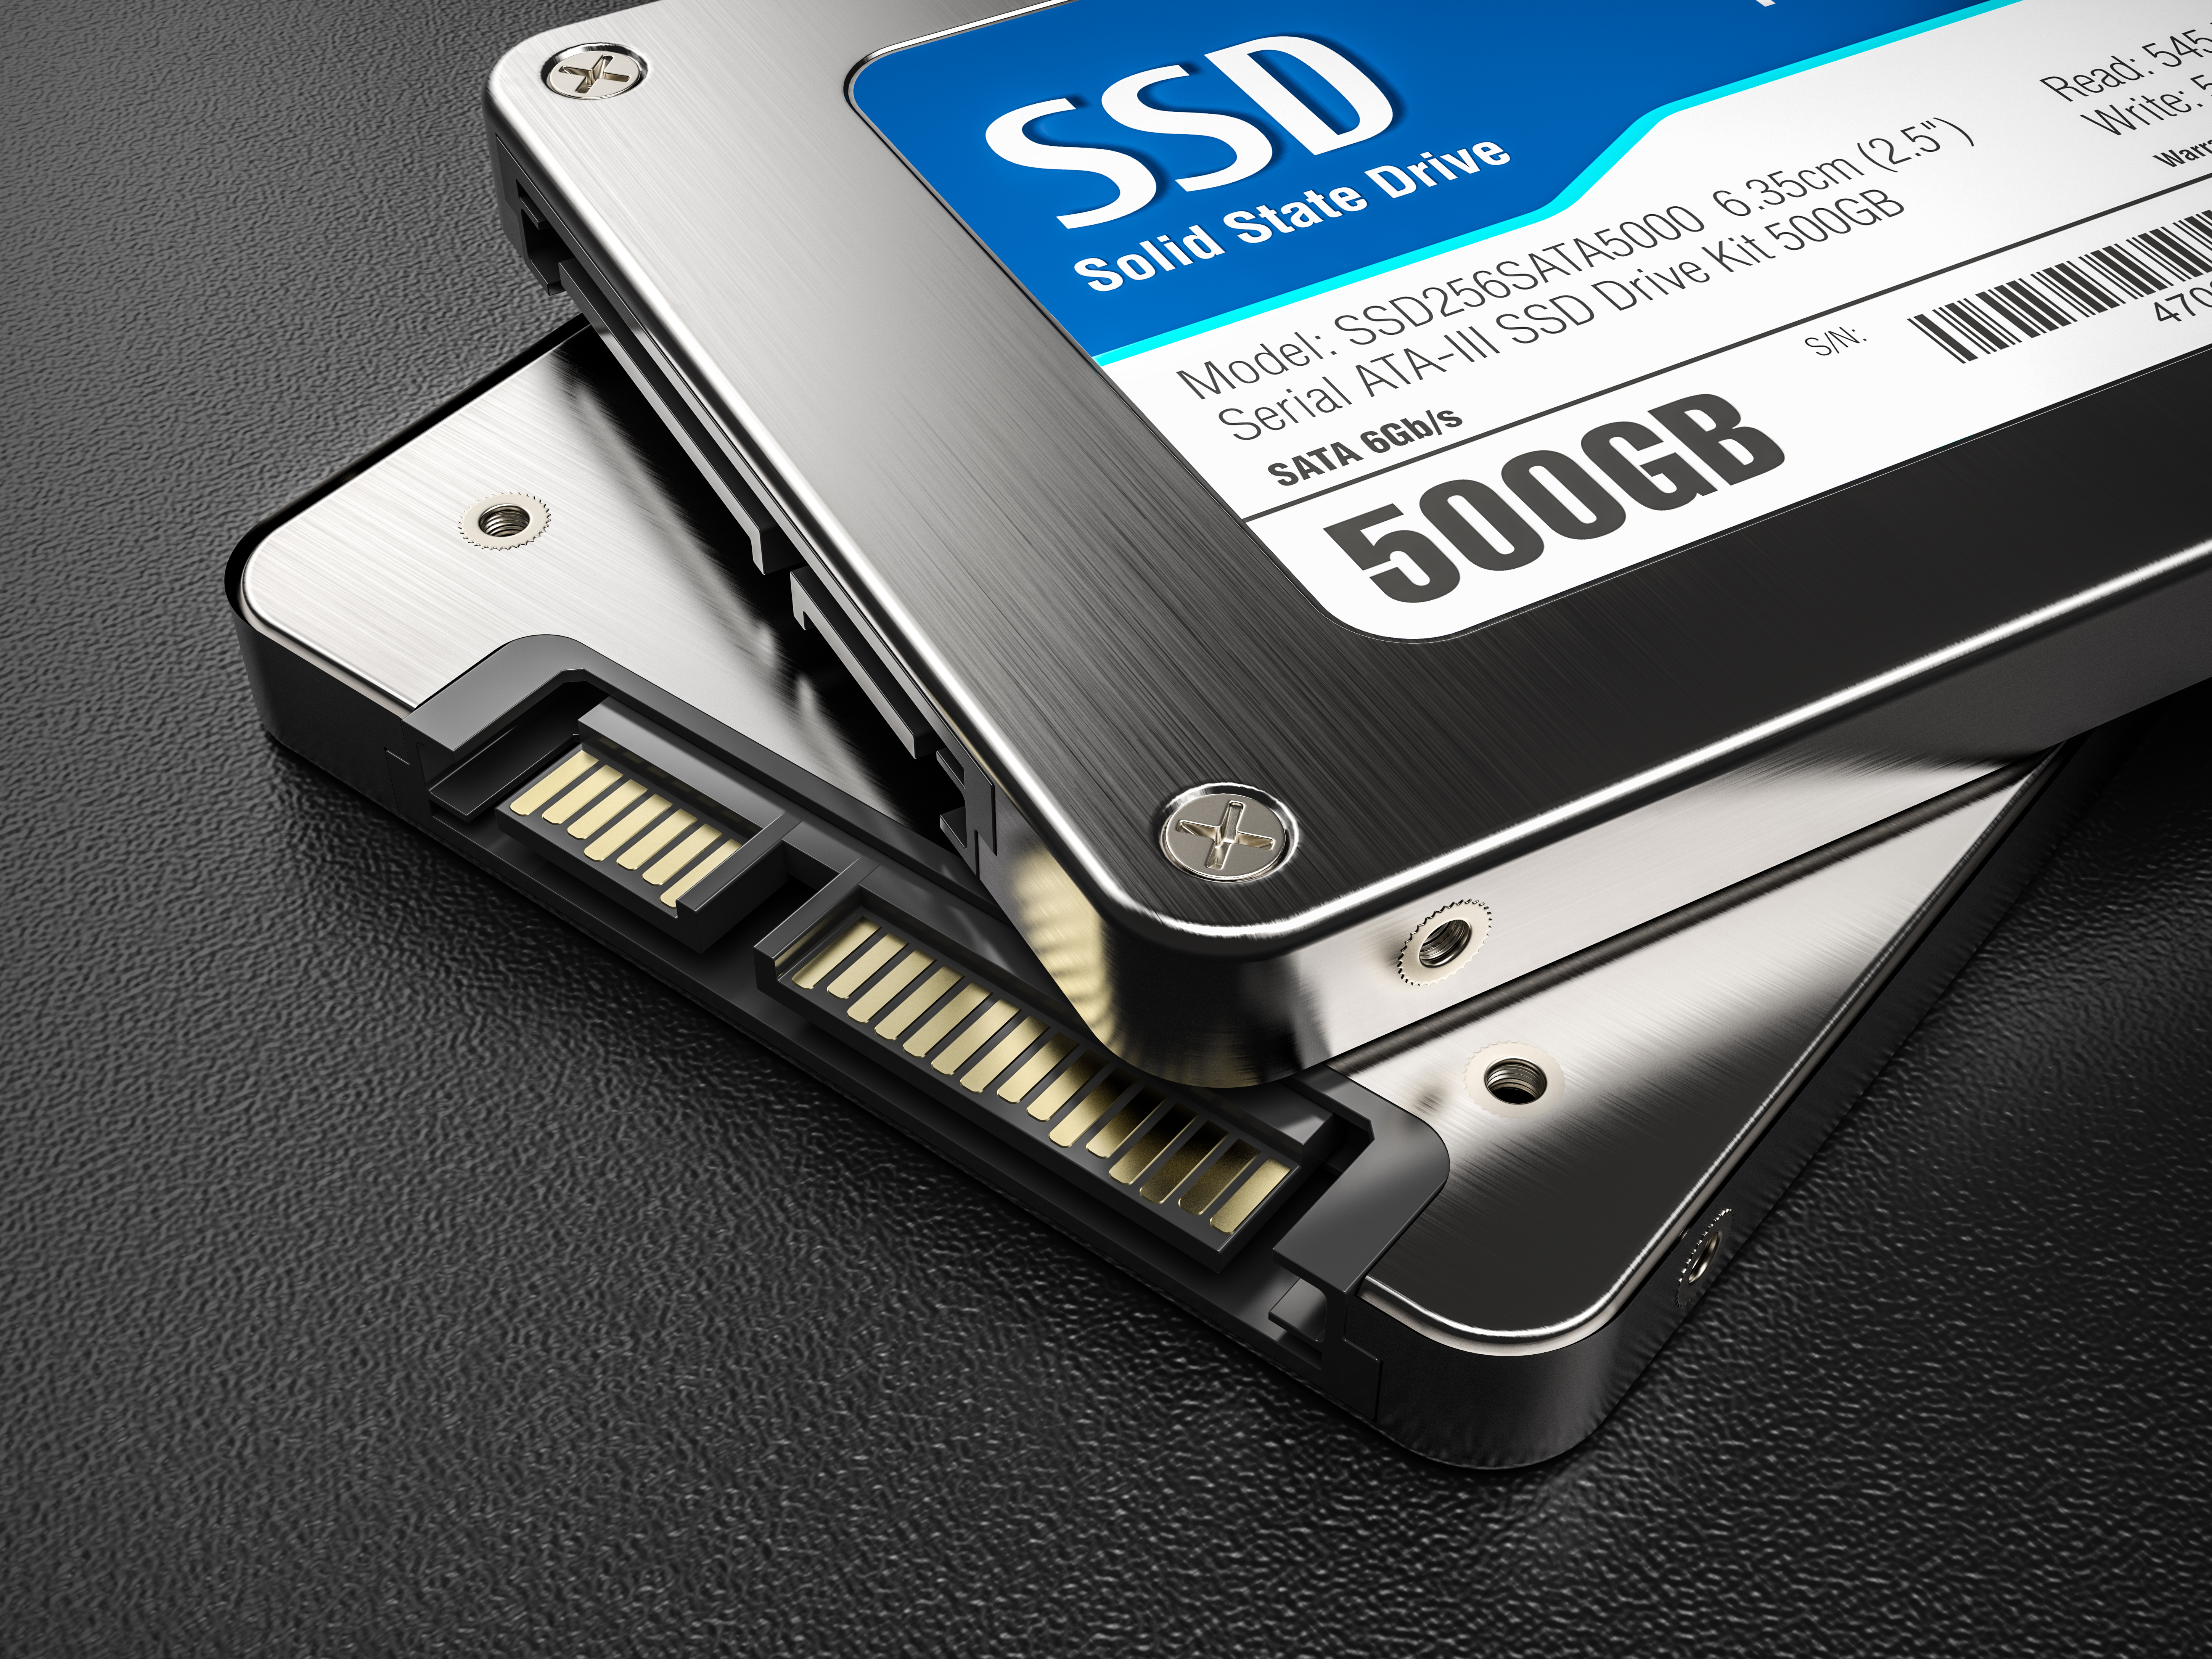 SSDs on top of each other, on a black surface